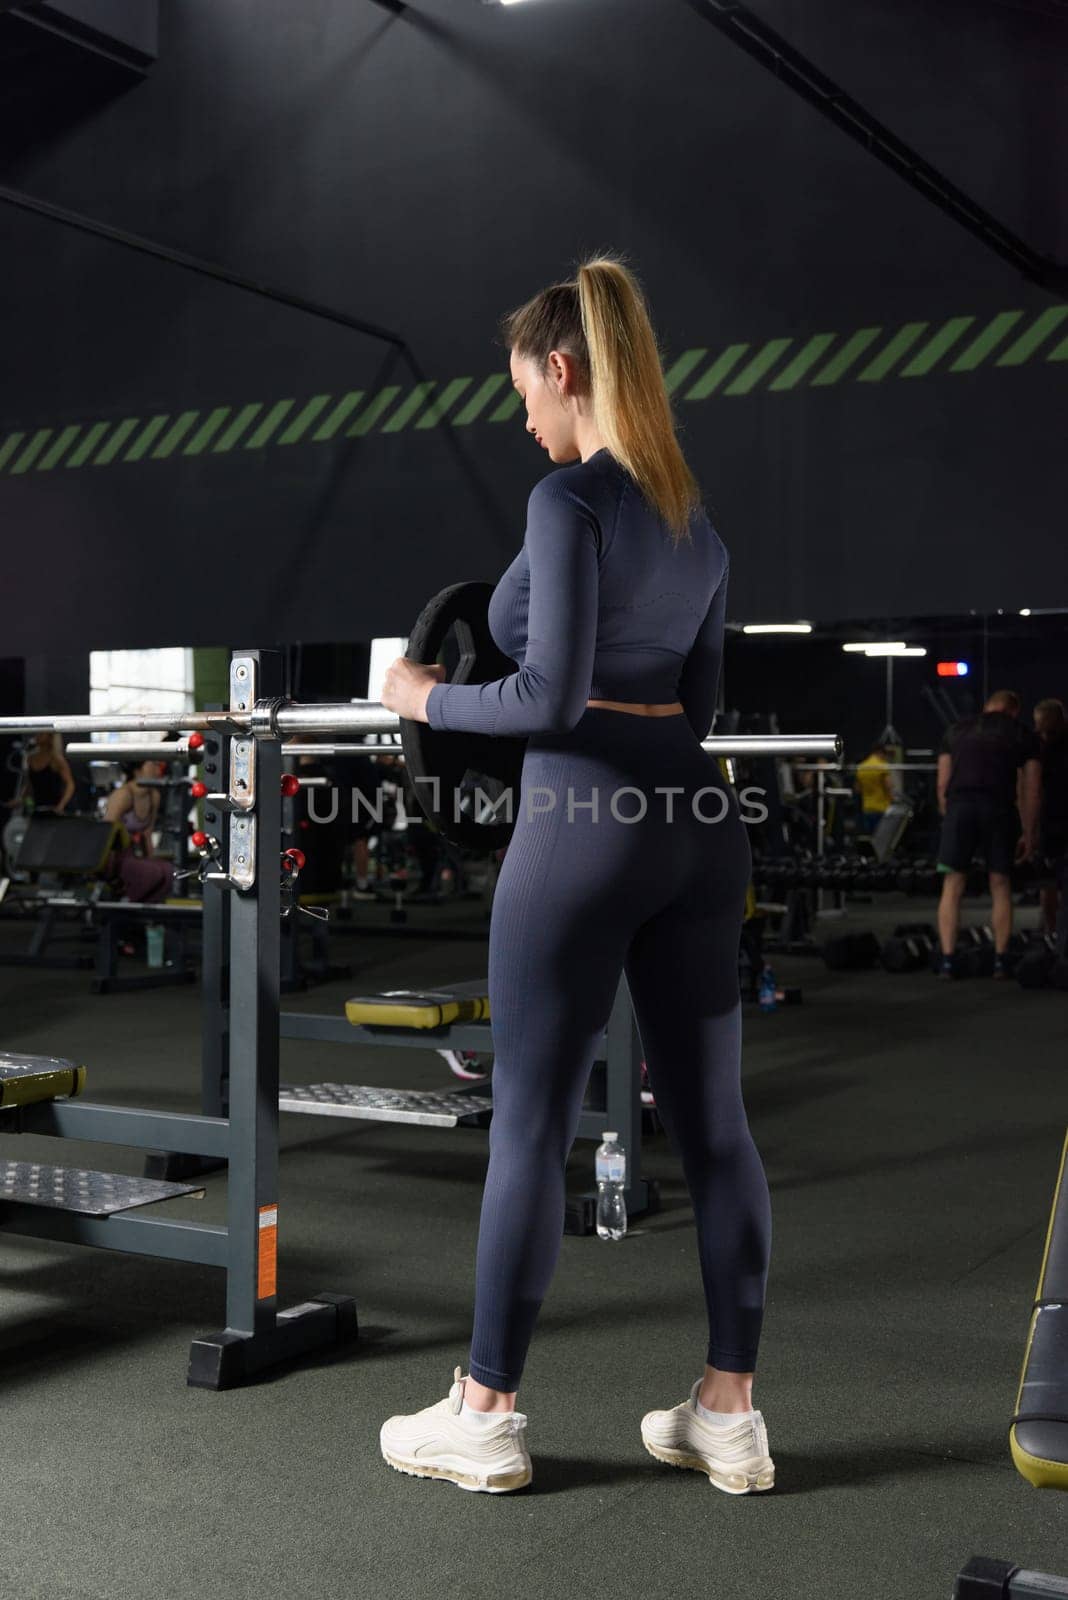 One adult caucasian woman female athlete putting weight plate on the barbel at gym . wearing blue leggins and long sleeve top. by Ashtray25